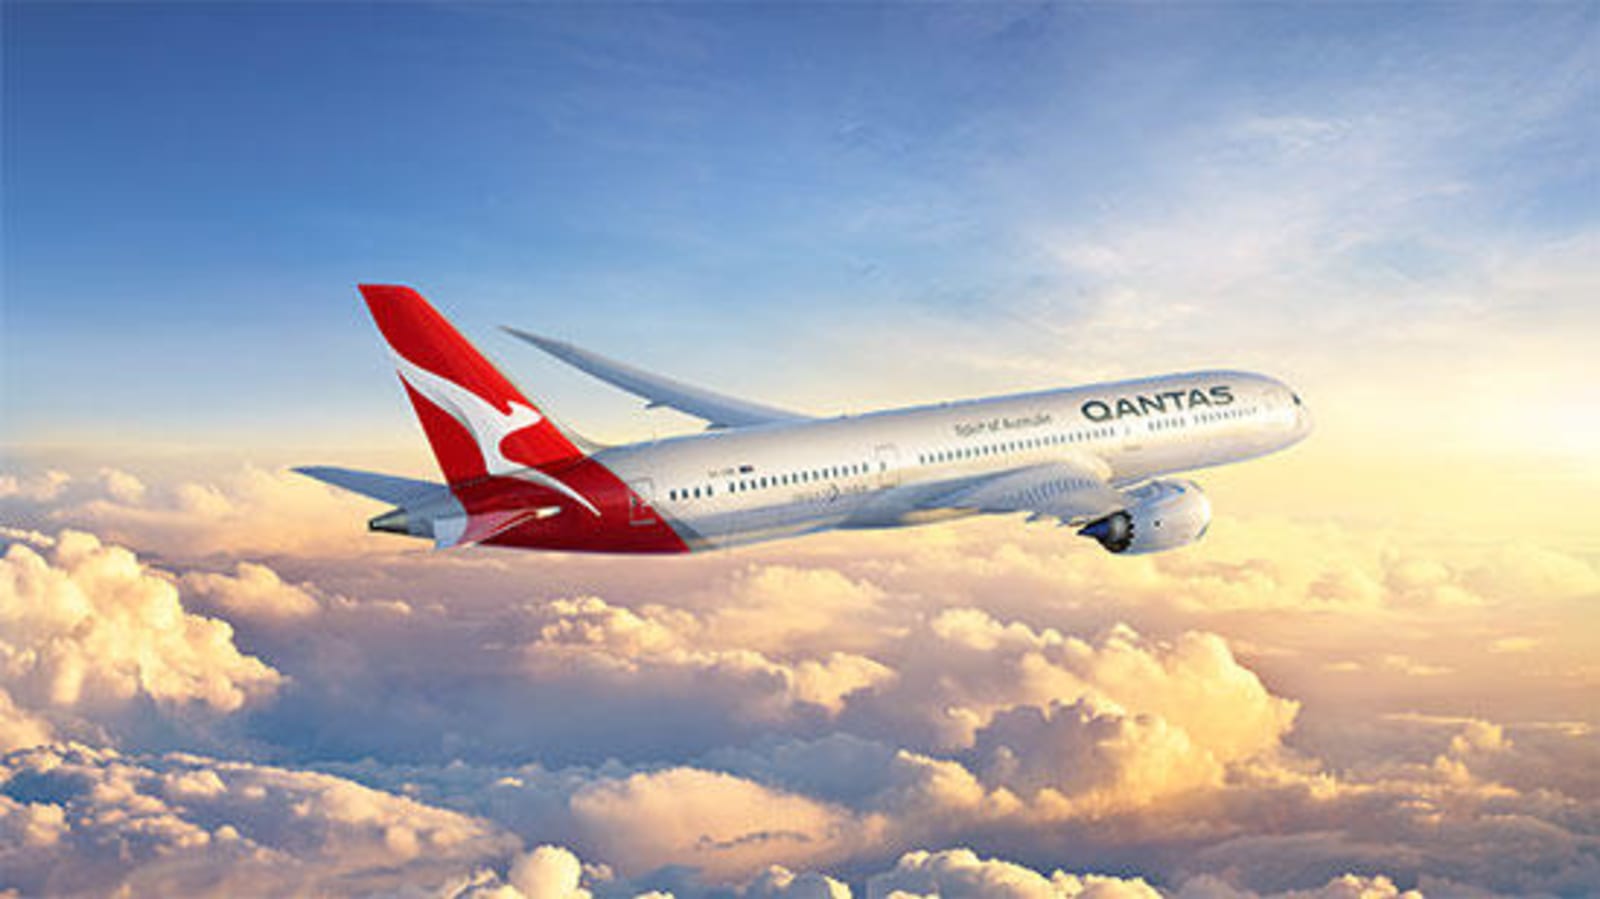 Qantas plane flying in the clouds, heading towards a vibrant sunset